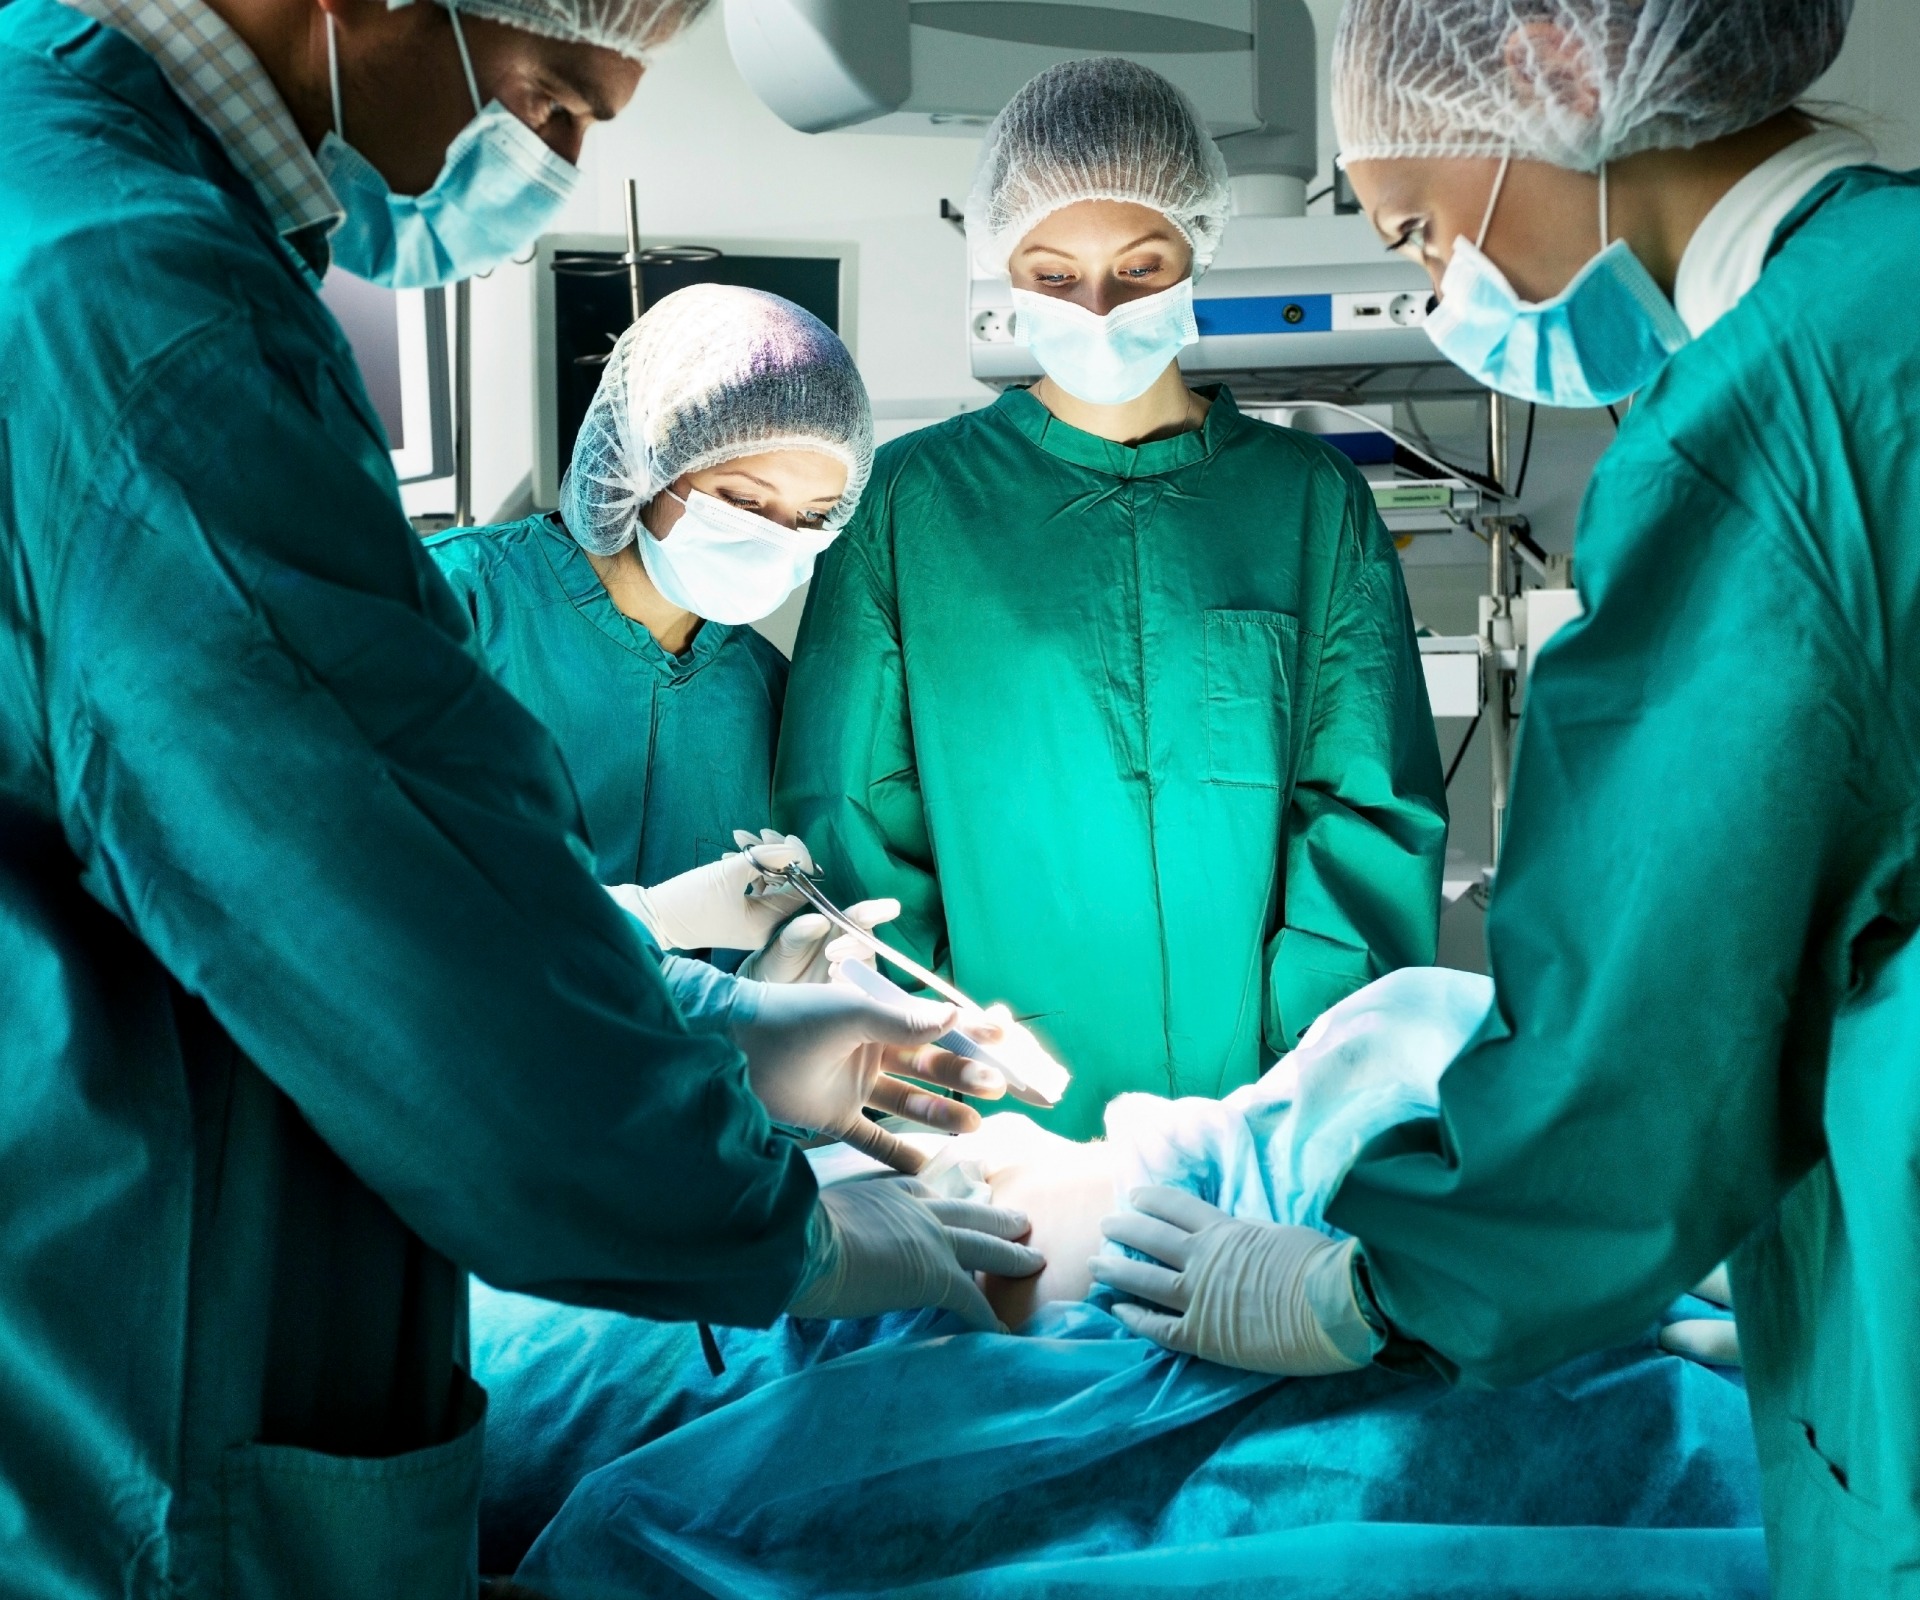 Surgeons caught badmouthing a patient on the operating table